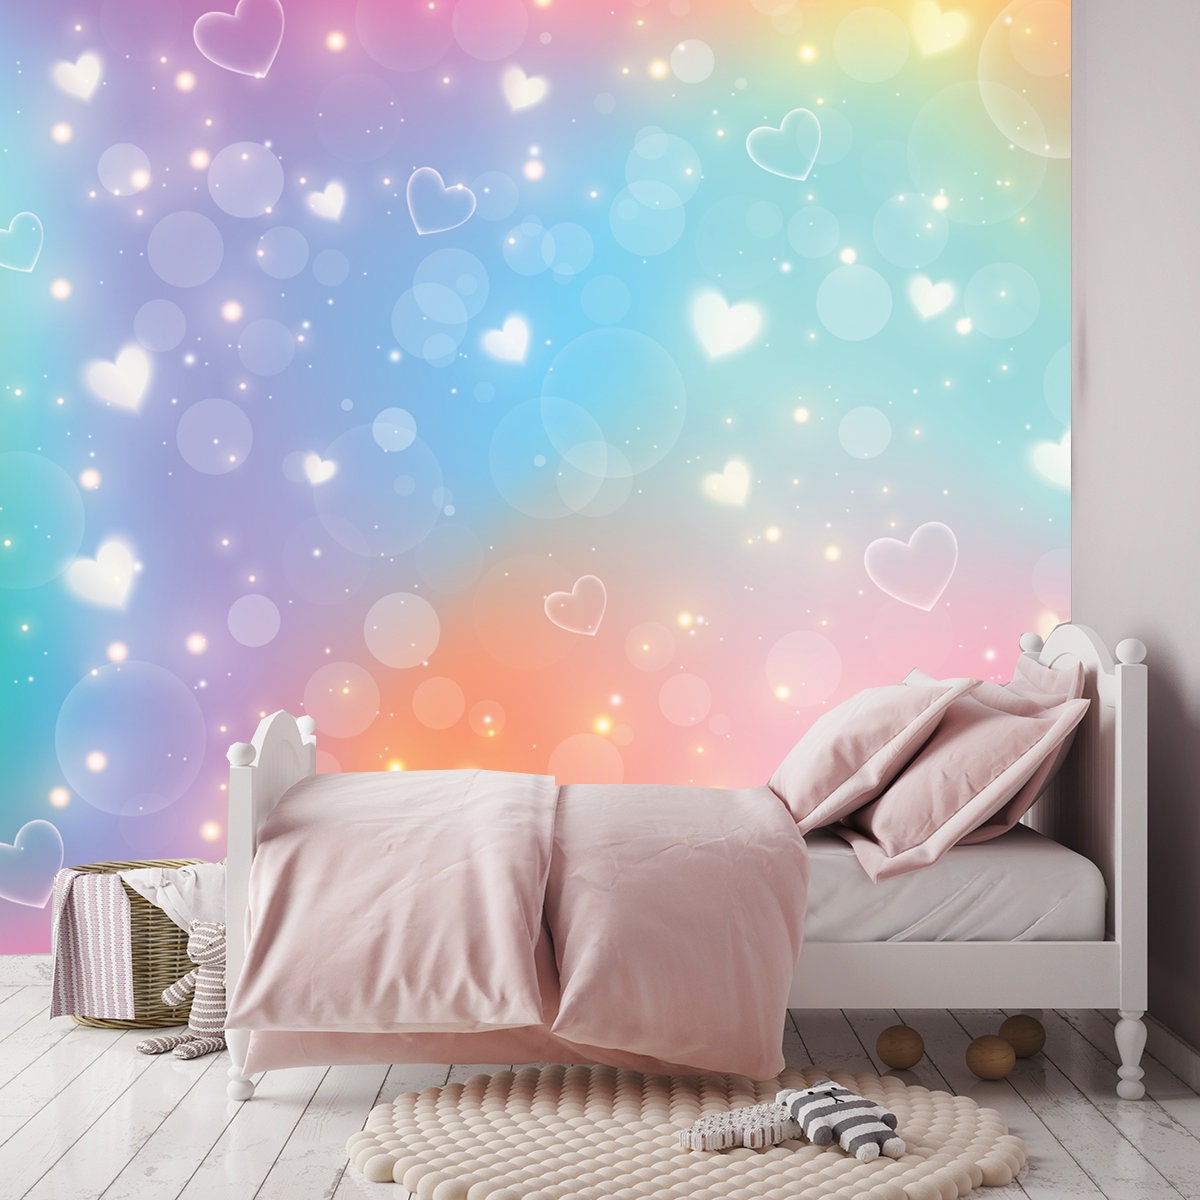 Abstract Background with Stars and Hearts. Purple Rainbow Sky with Glitter Wallpaper Girl Bedroom Mural